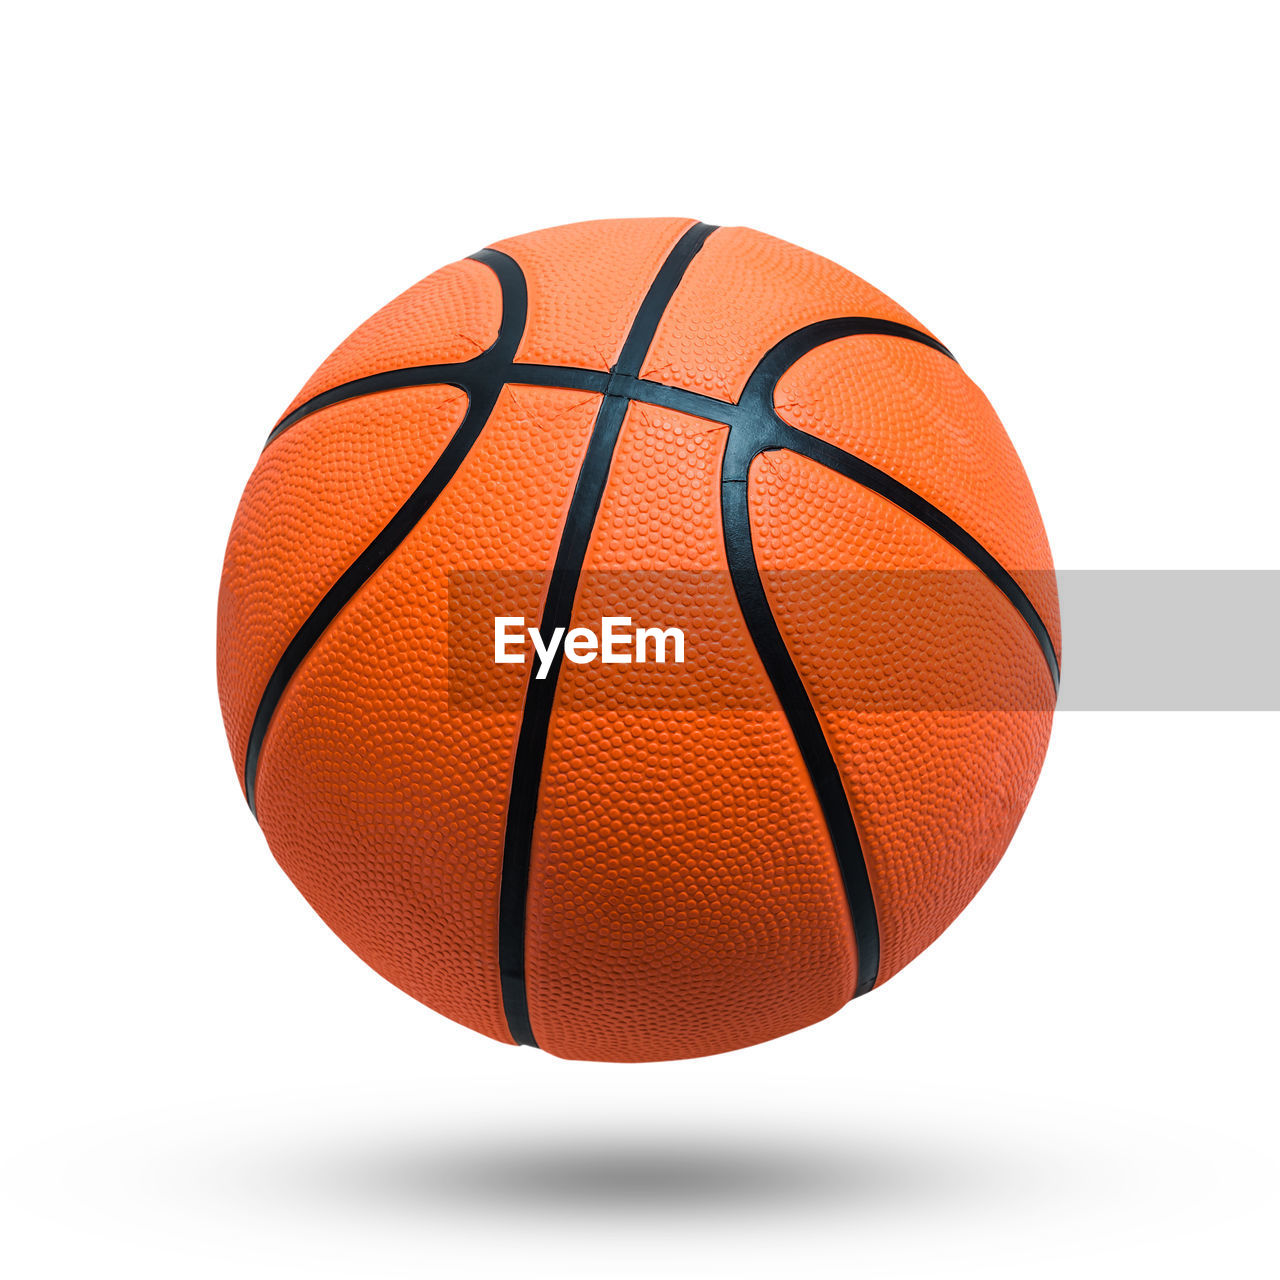 Close-up of basketball against white background